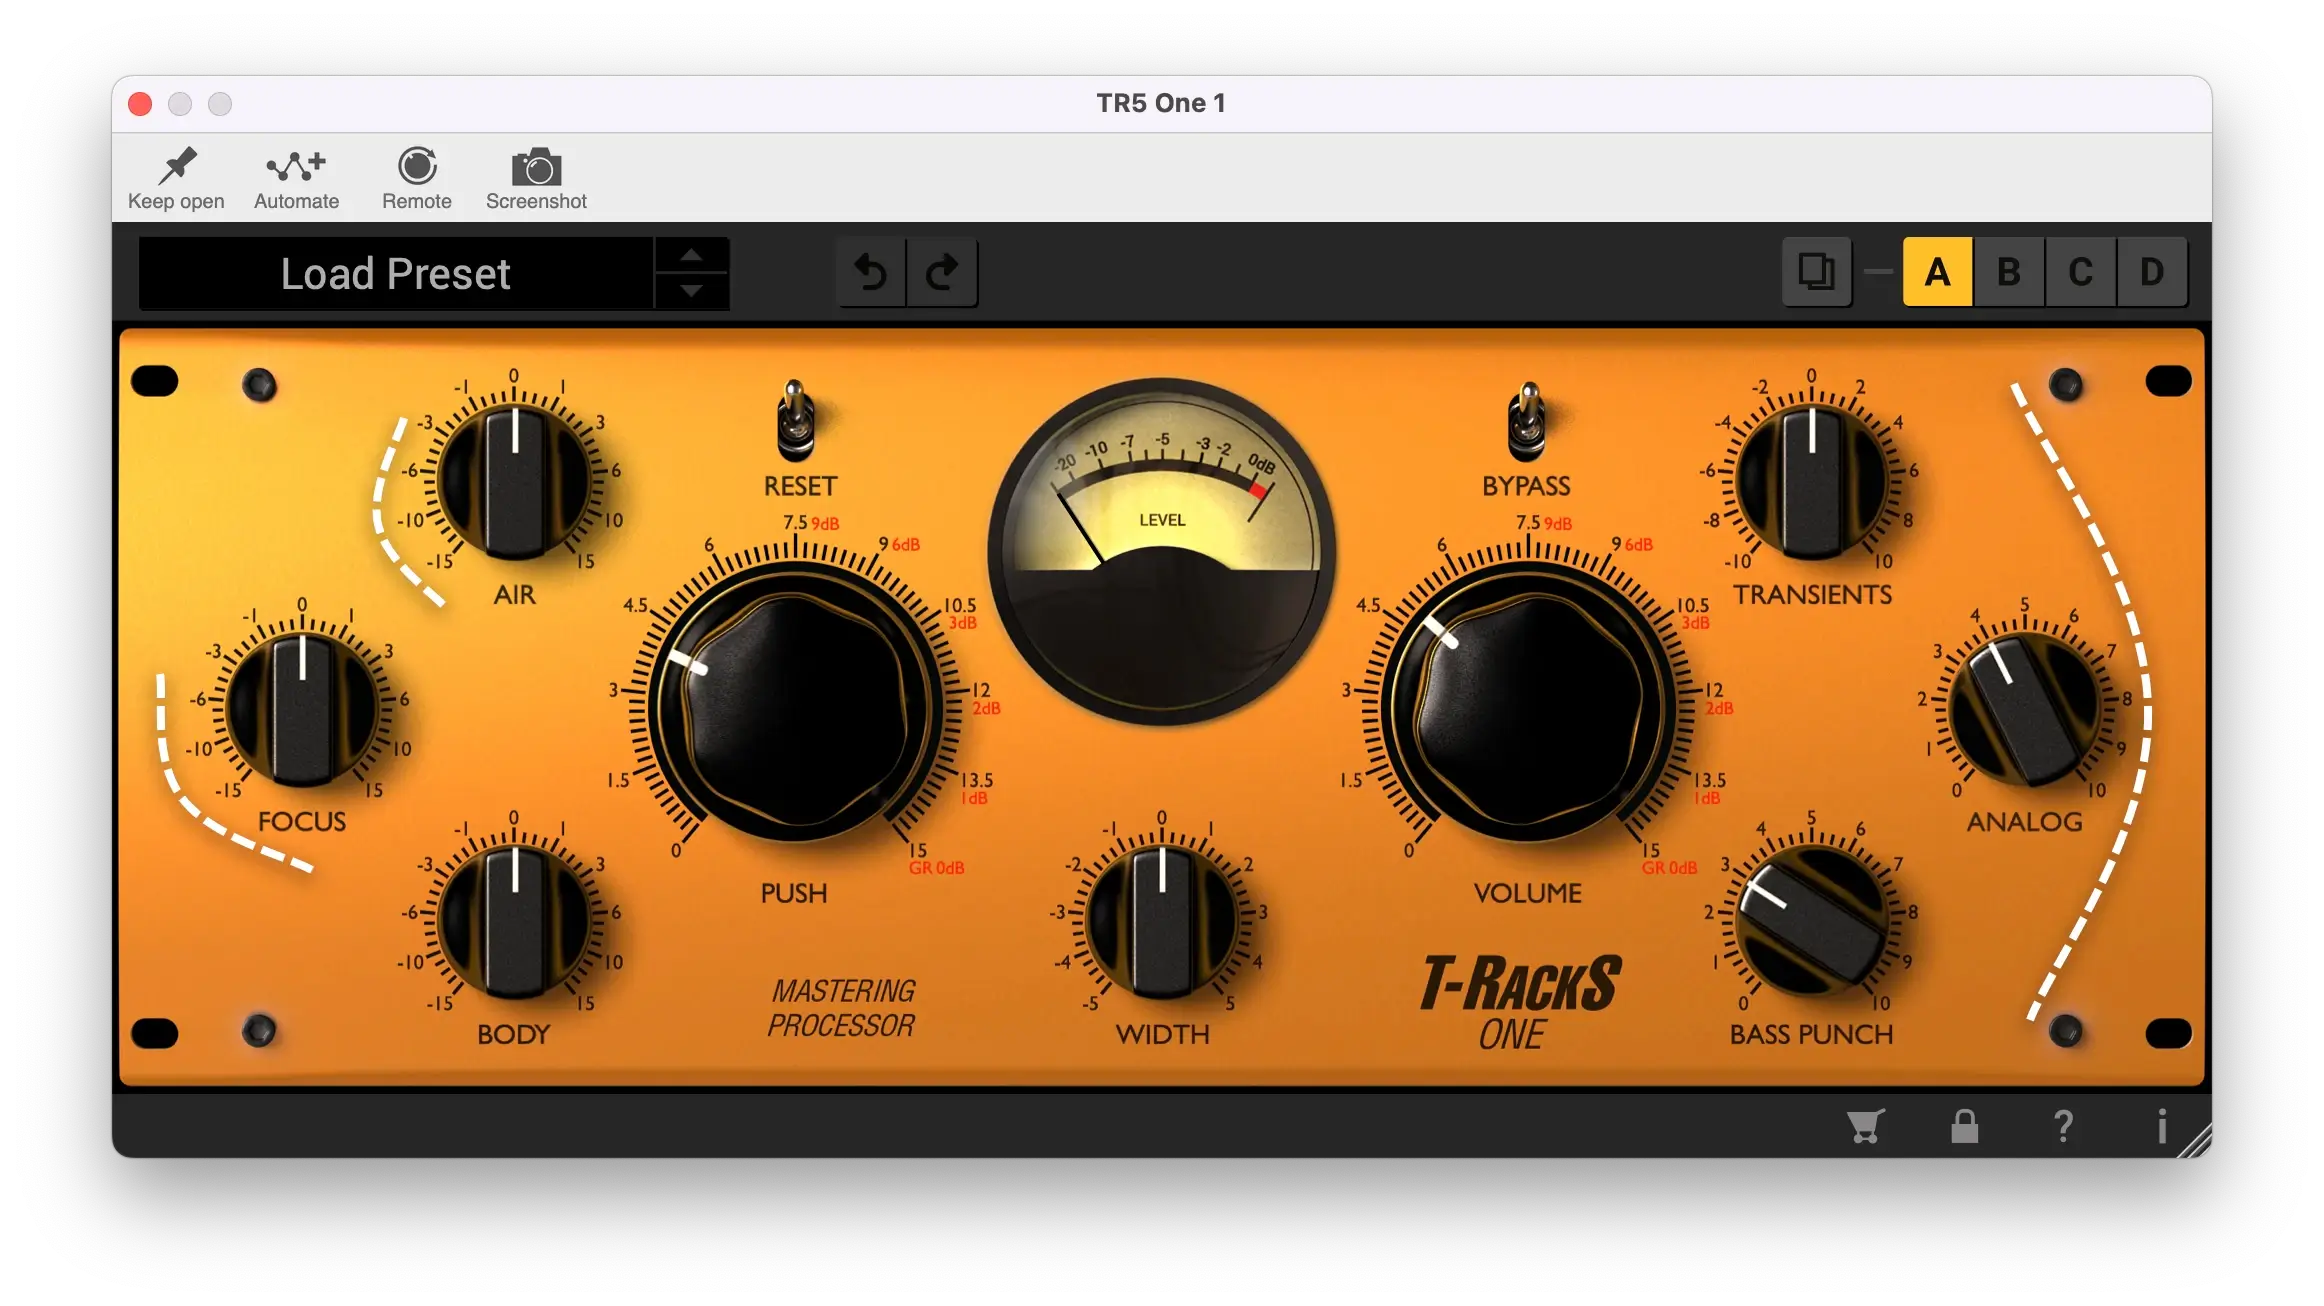 THE ONE Mixing and Master VST Plugin You Need